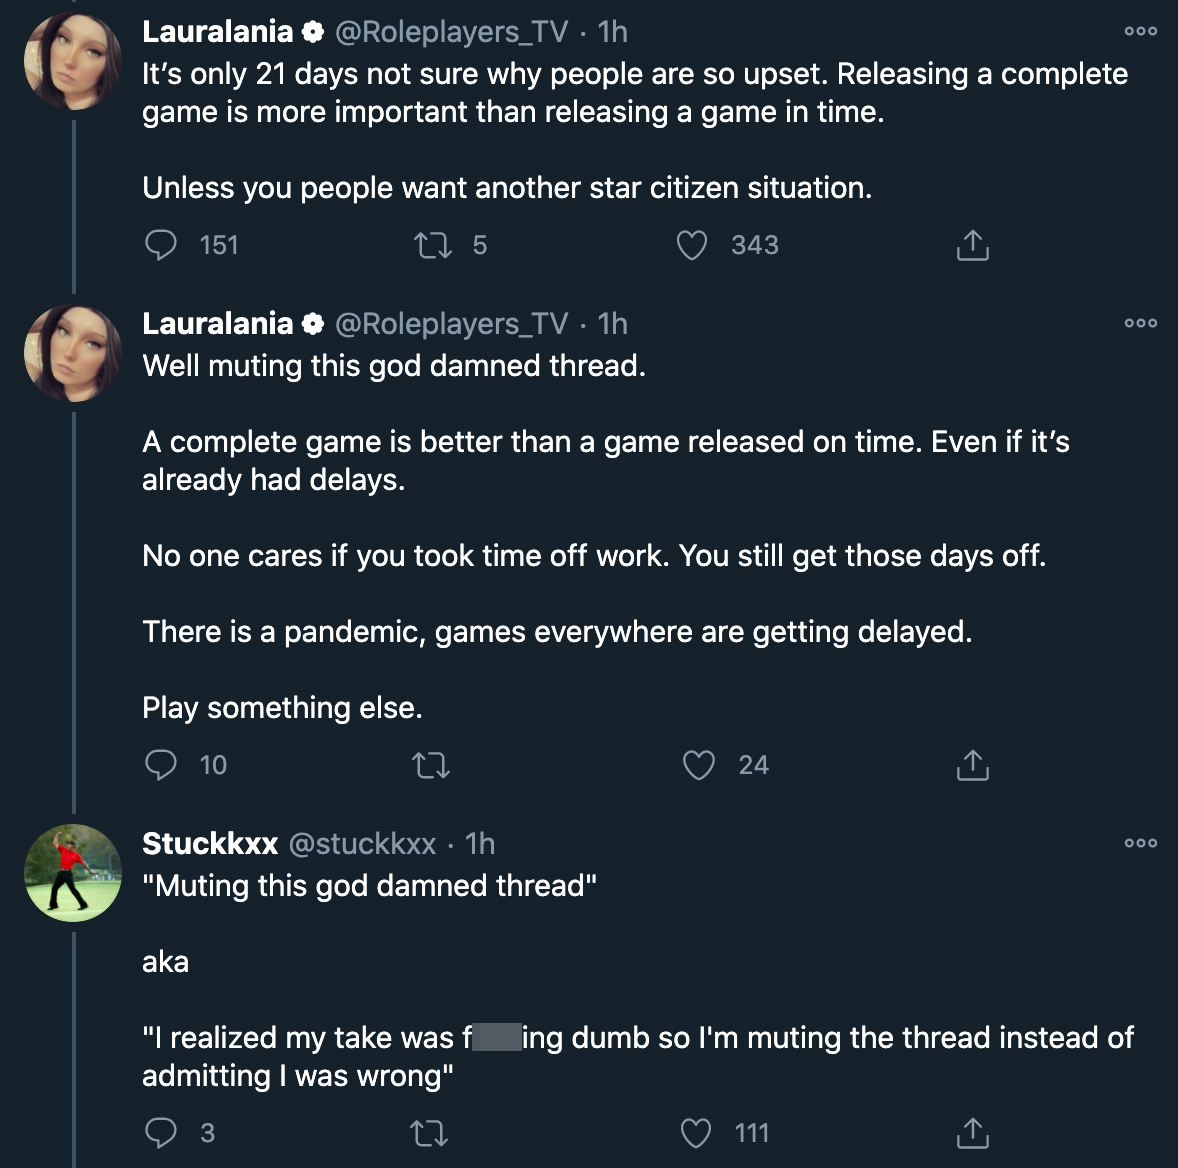 cyberpunk 2077 delay - It's only 21 days not sure why people are so upset. Releasing a complete game is more important than releasing a game in time. Unless you people want another star citizen situation. Well muting this goddamn thread